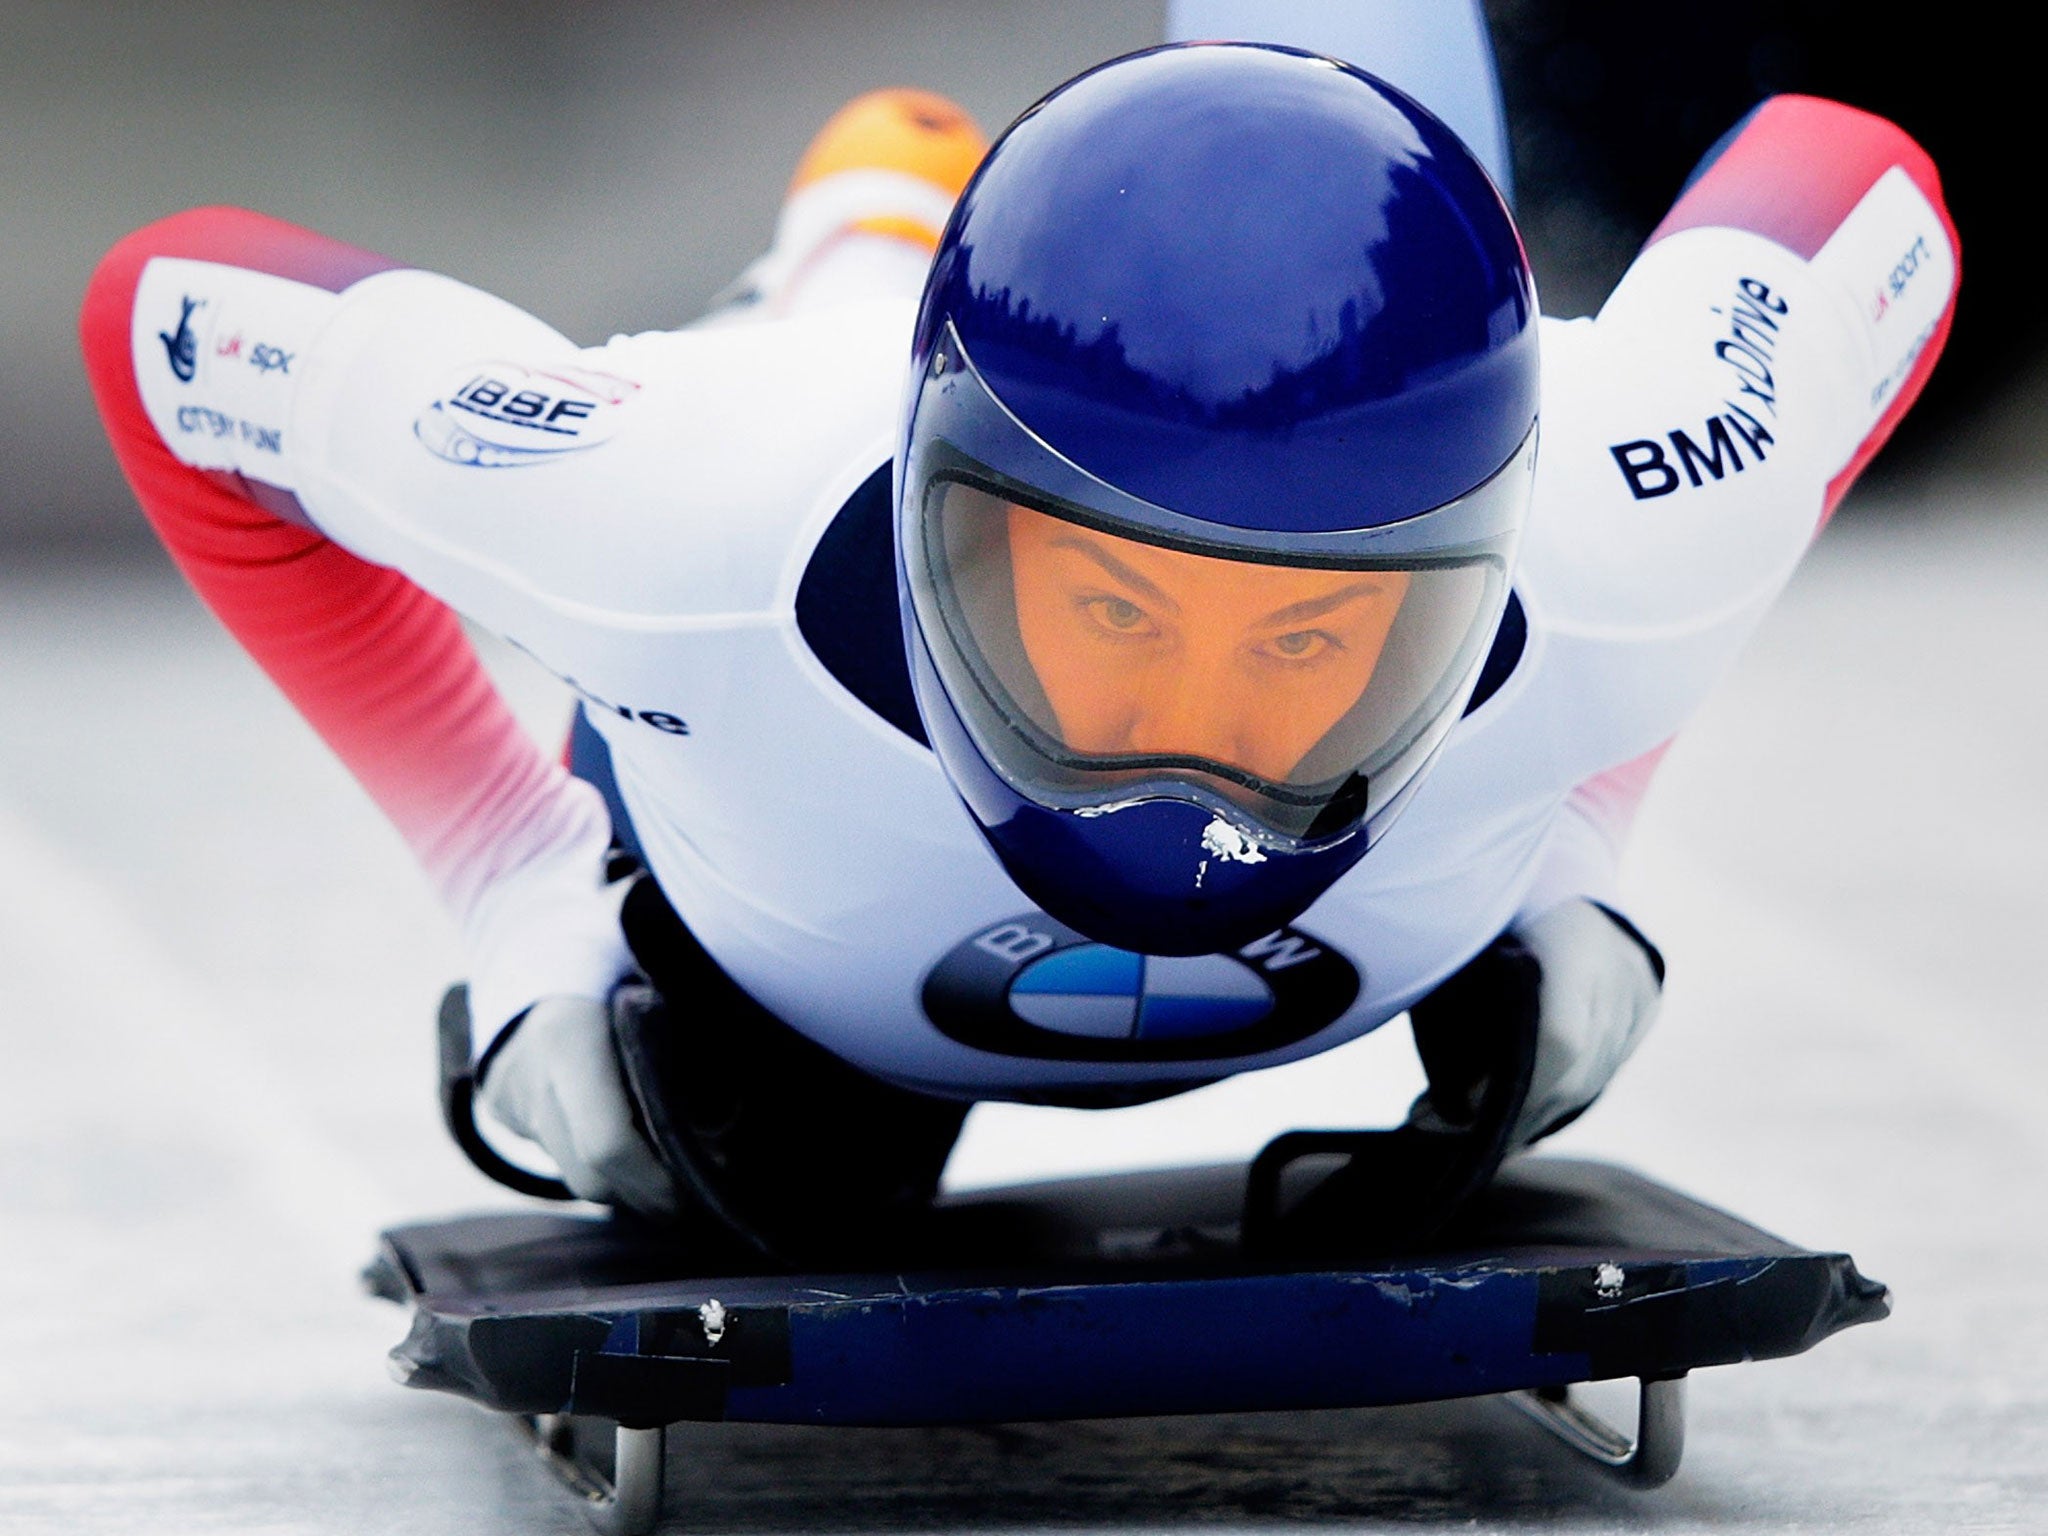 Laura Deas on Day 5 at IBSF World Championships in Innsbruck